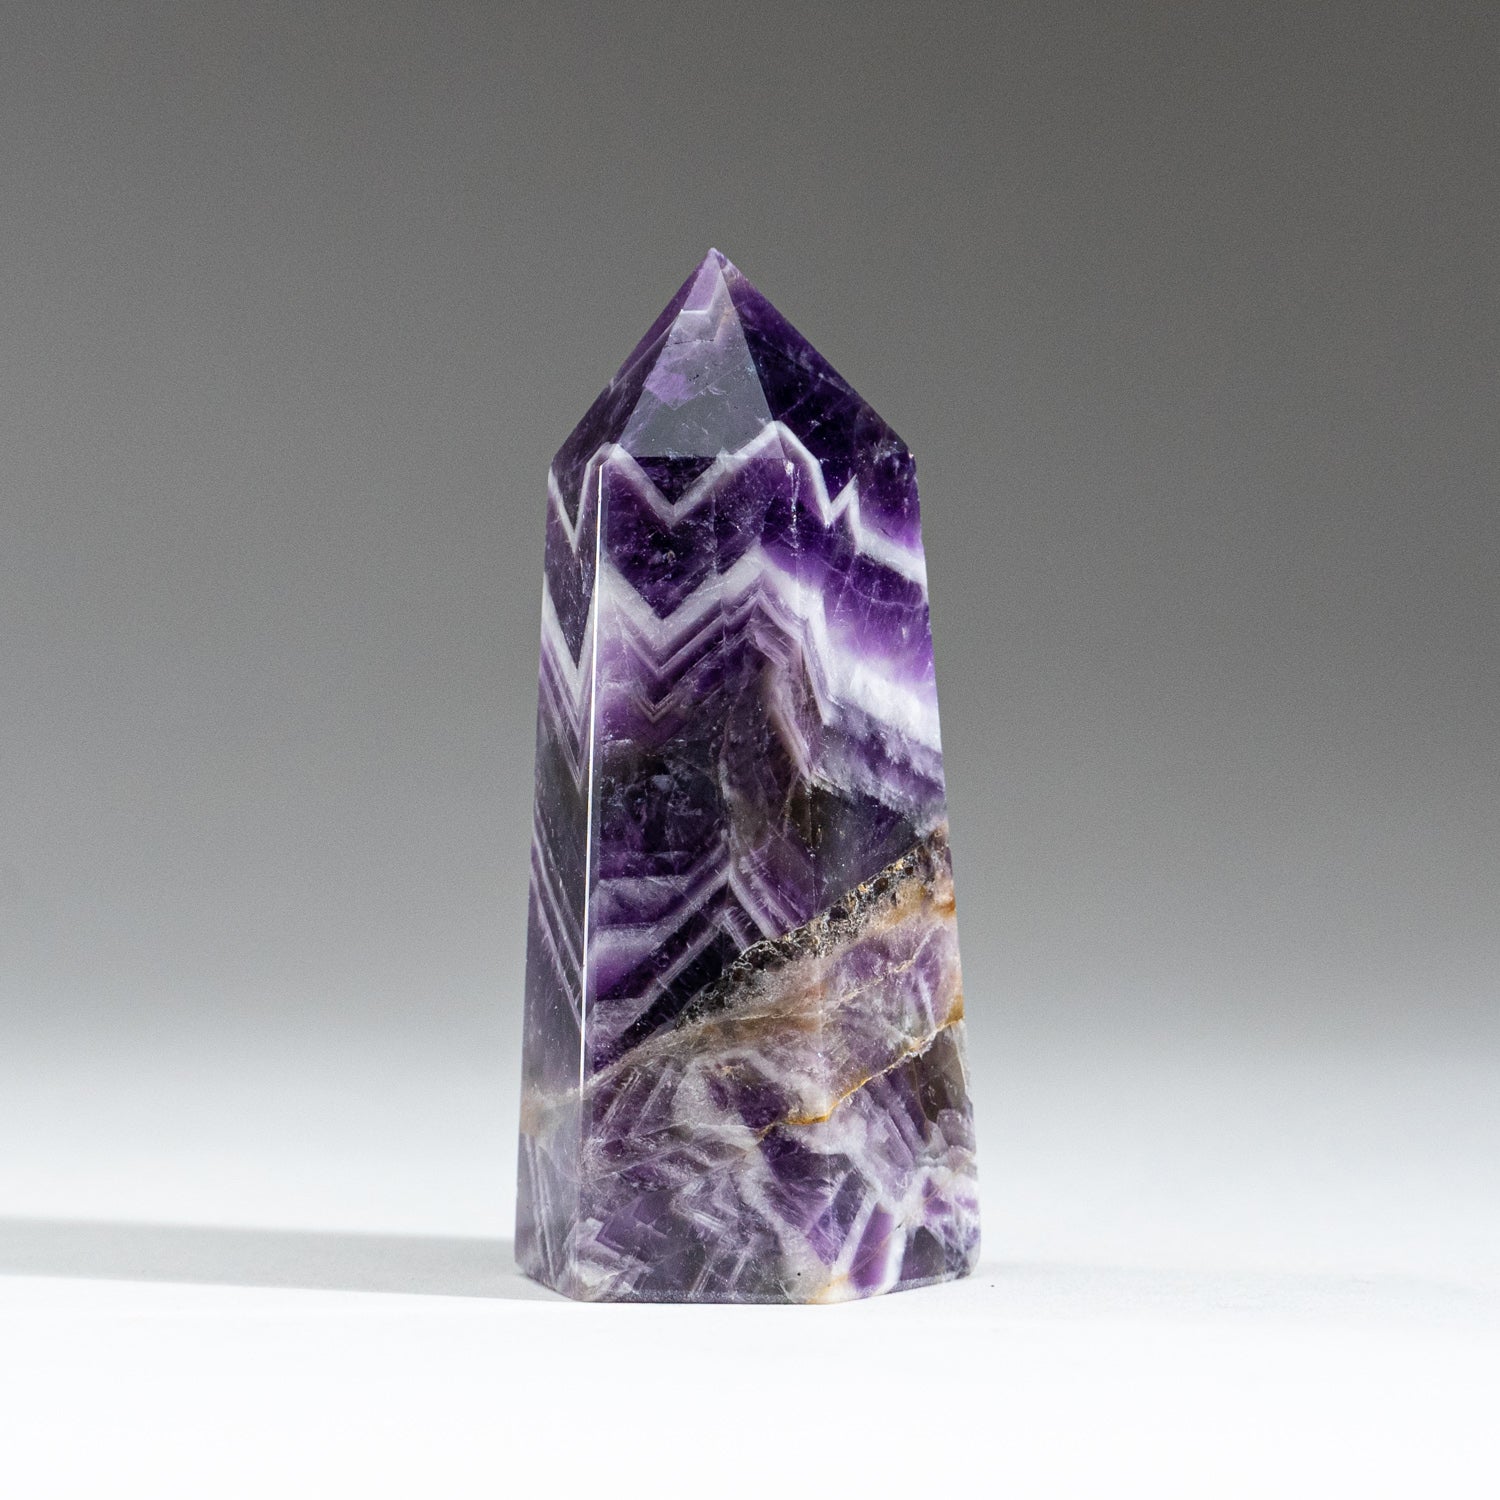 Polished Chevron Amethyst Point from Brazil (113.6 grams)